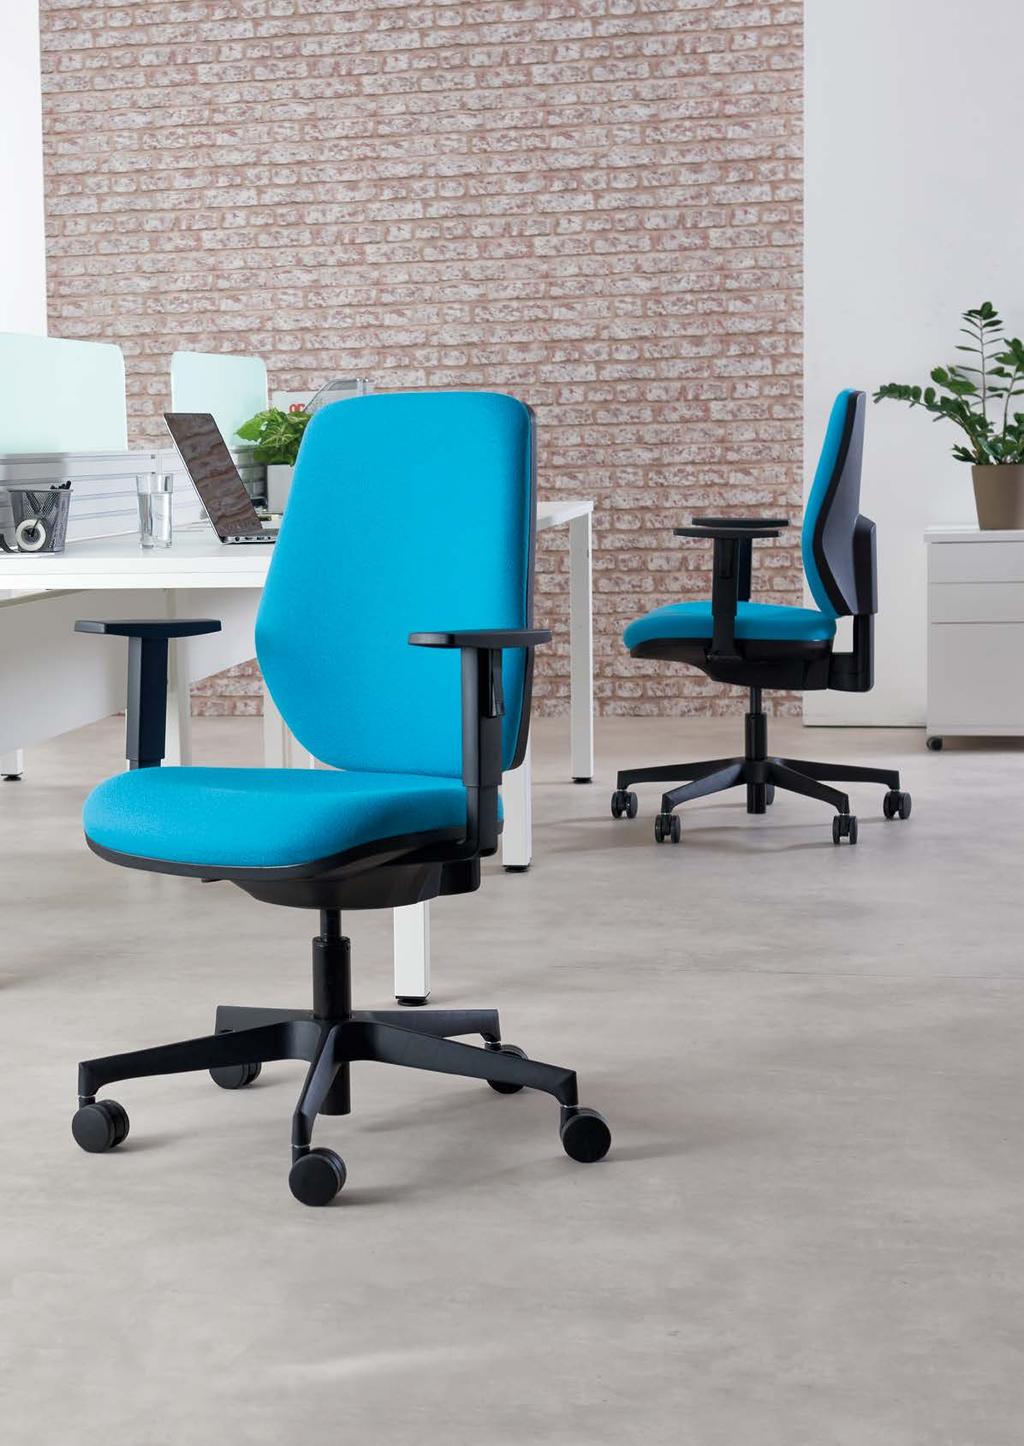 Remi features a contoured seat and back as well as height adjustable arm for comfort and